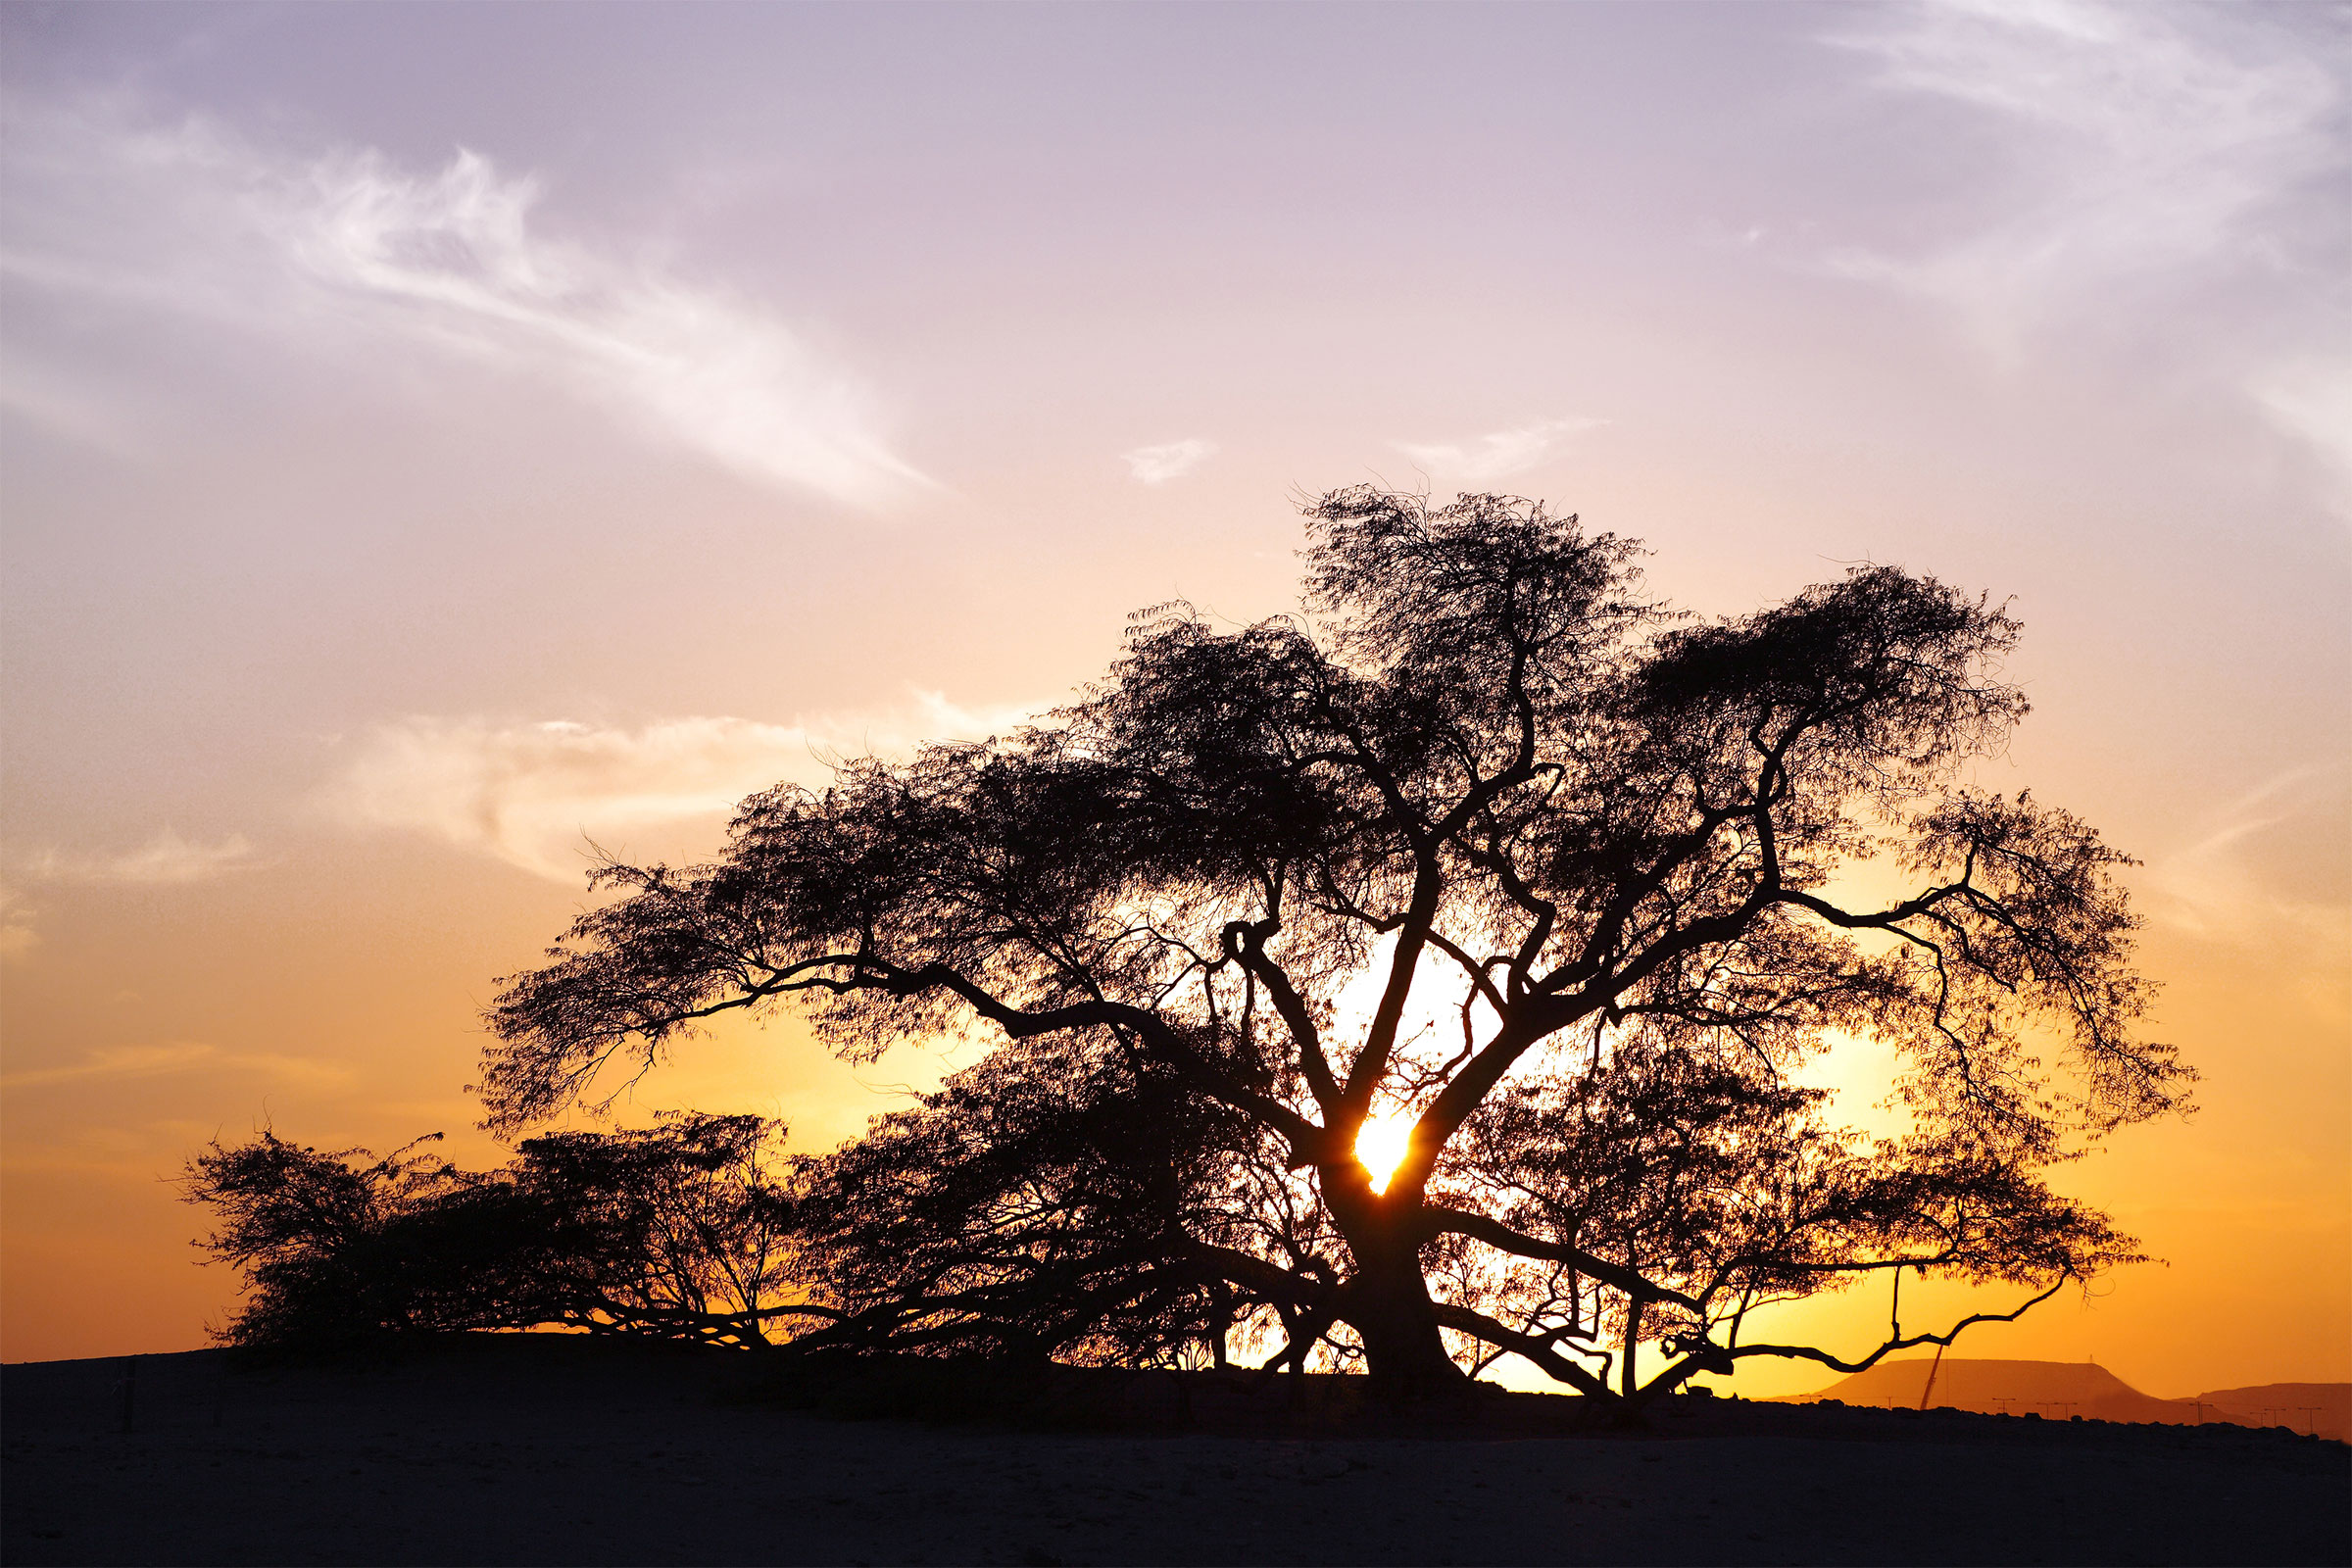 400 year-old Mesquite Tree Sunset in Bahrain